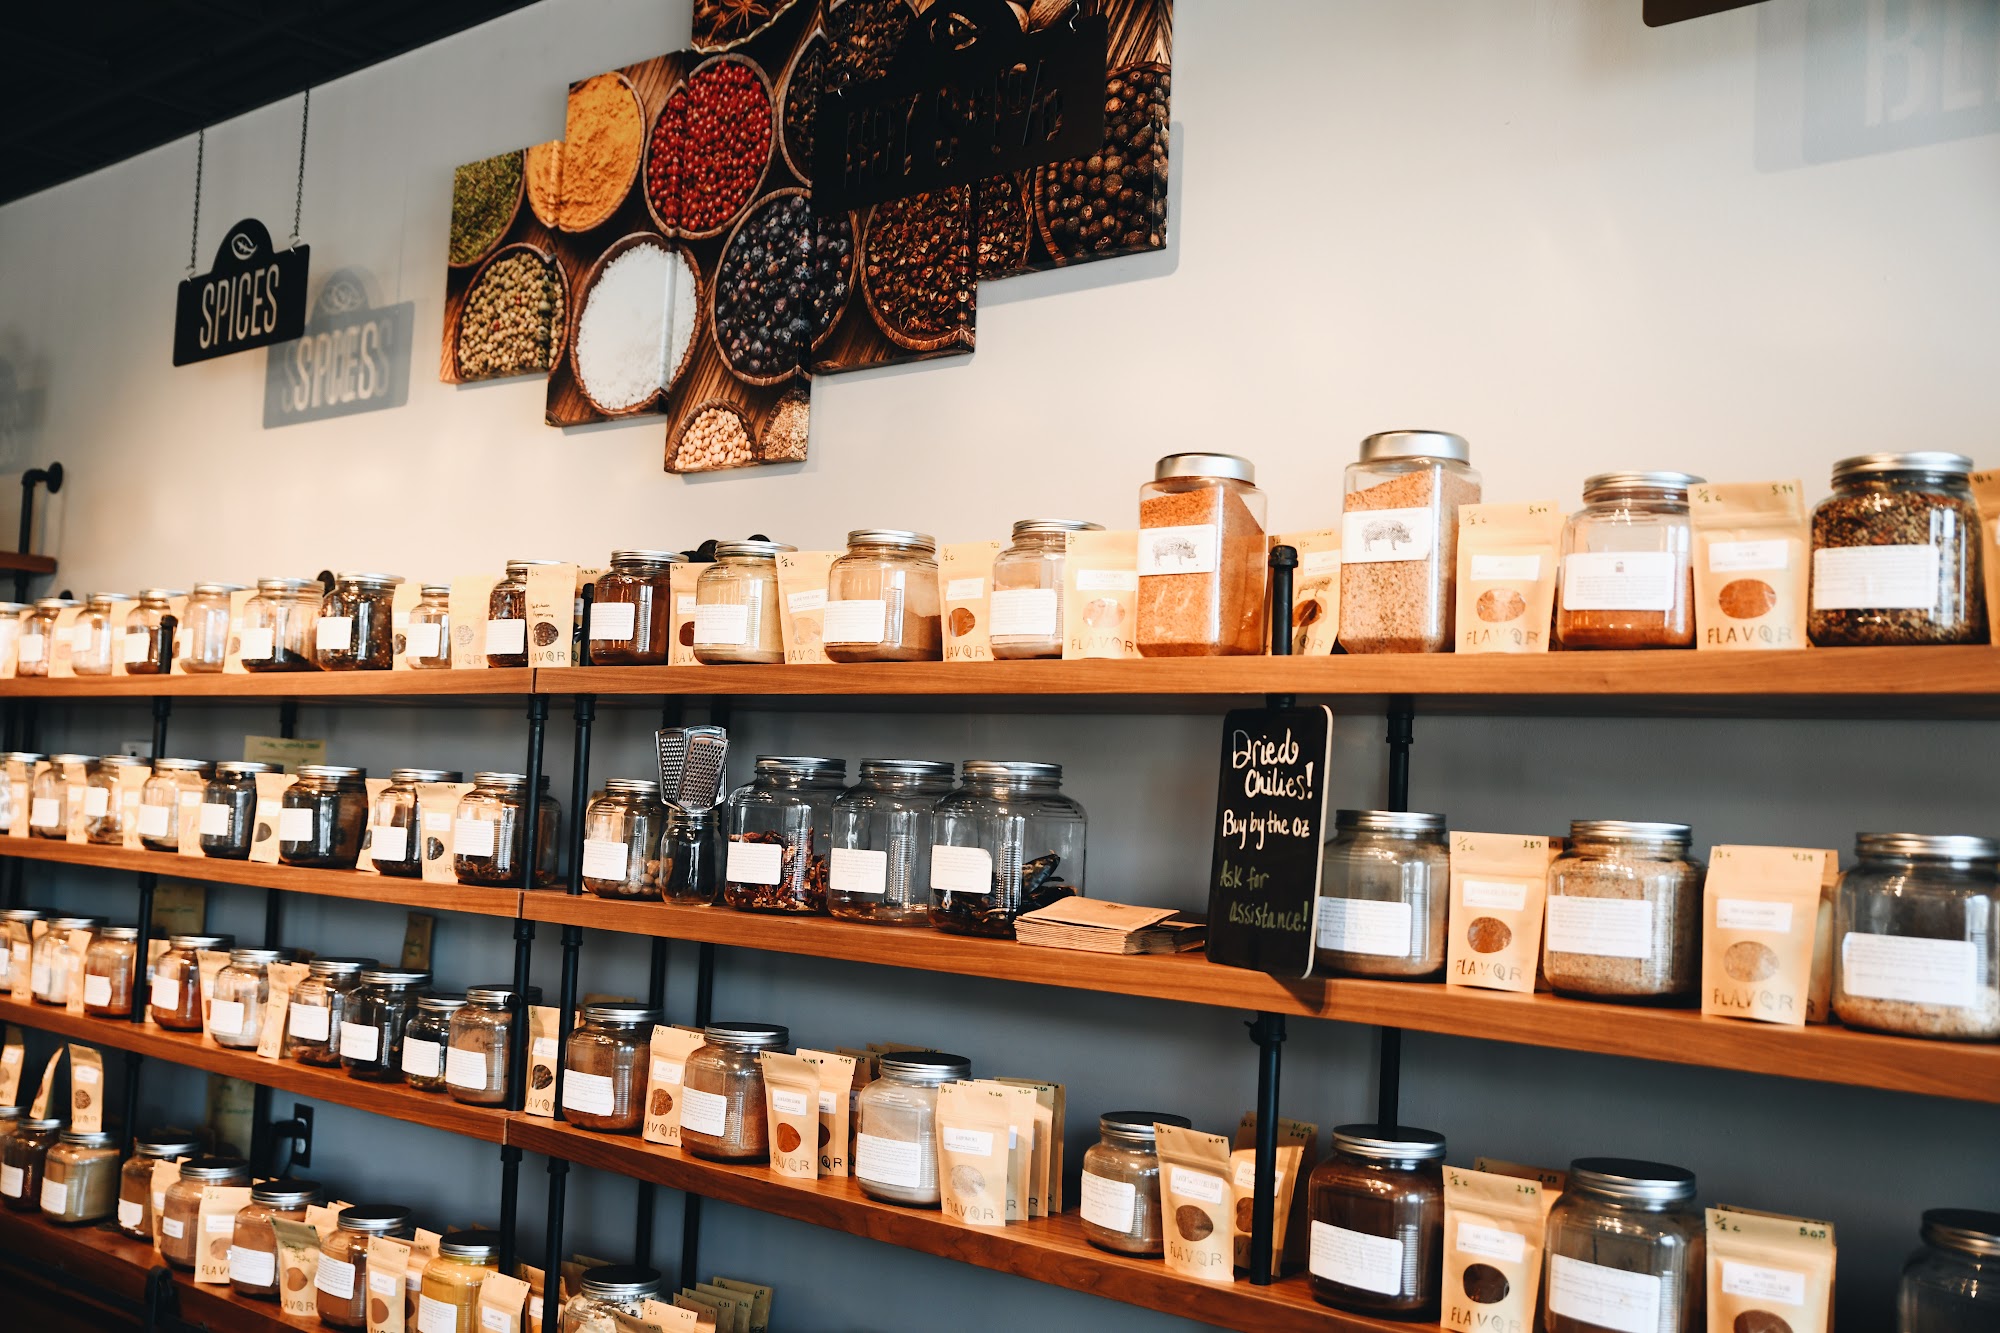 The Downtown Deli and FLAVOR Spice Shop & Specialty Food Market